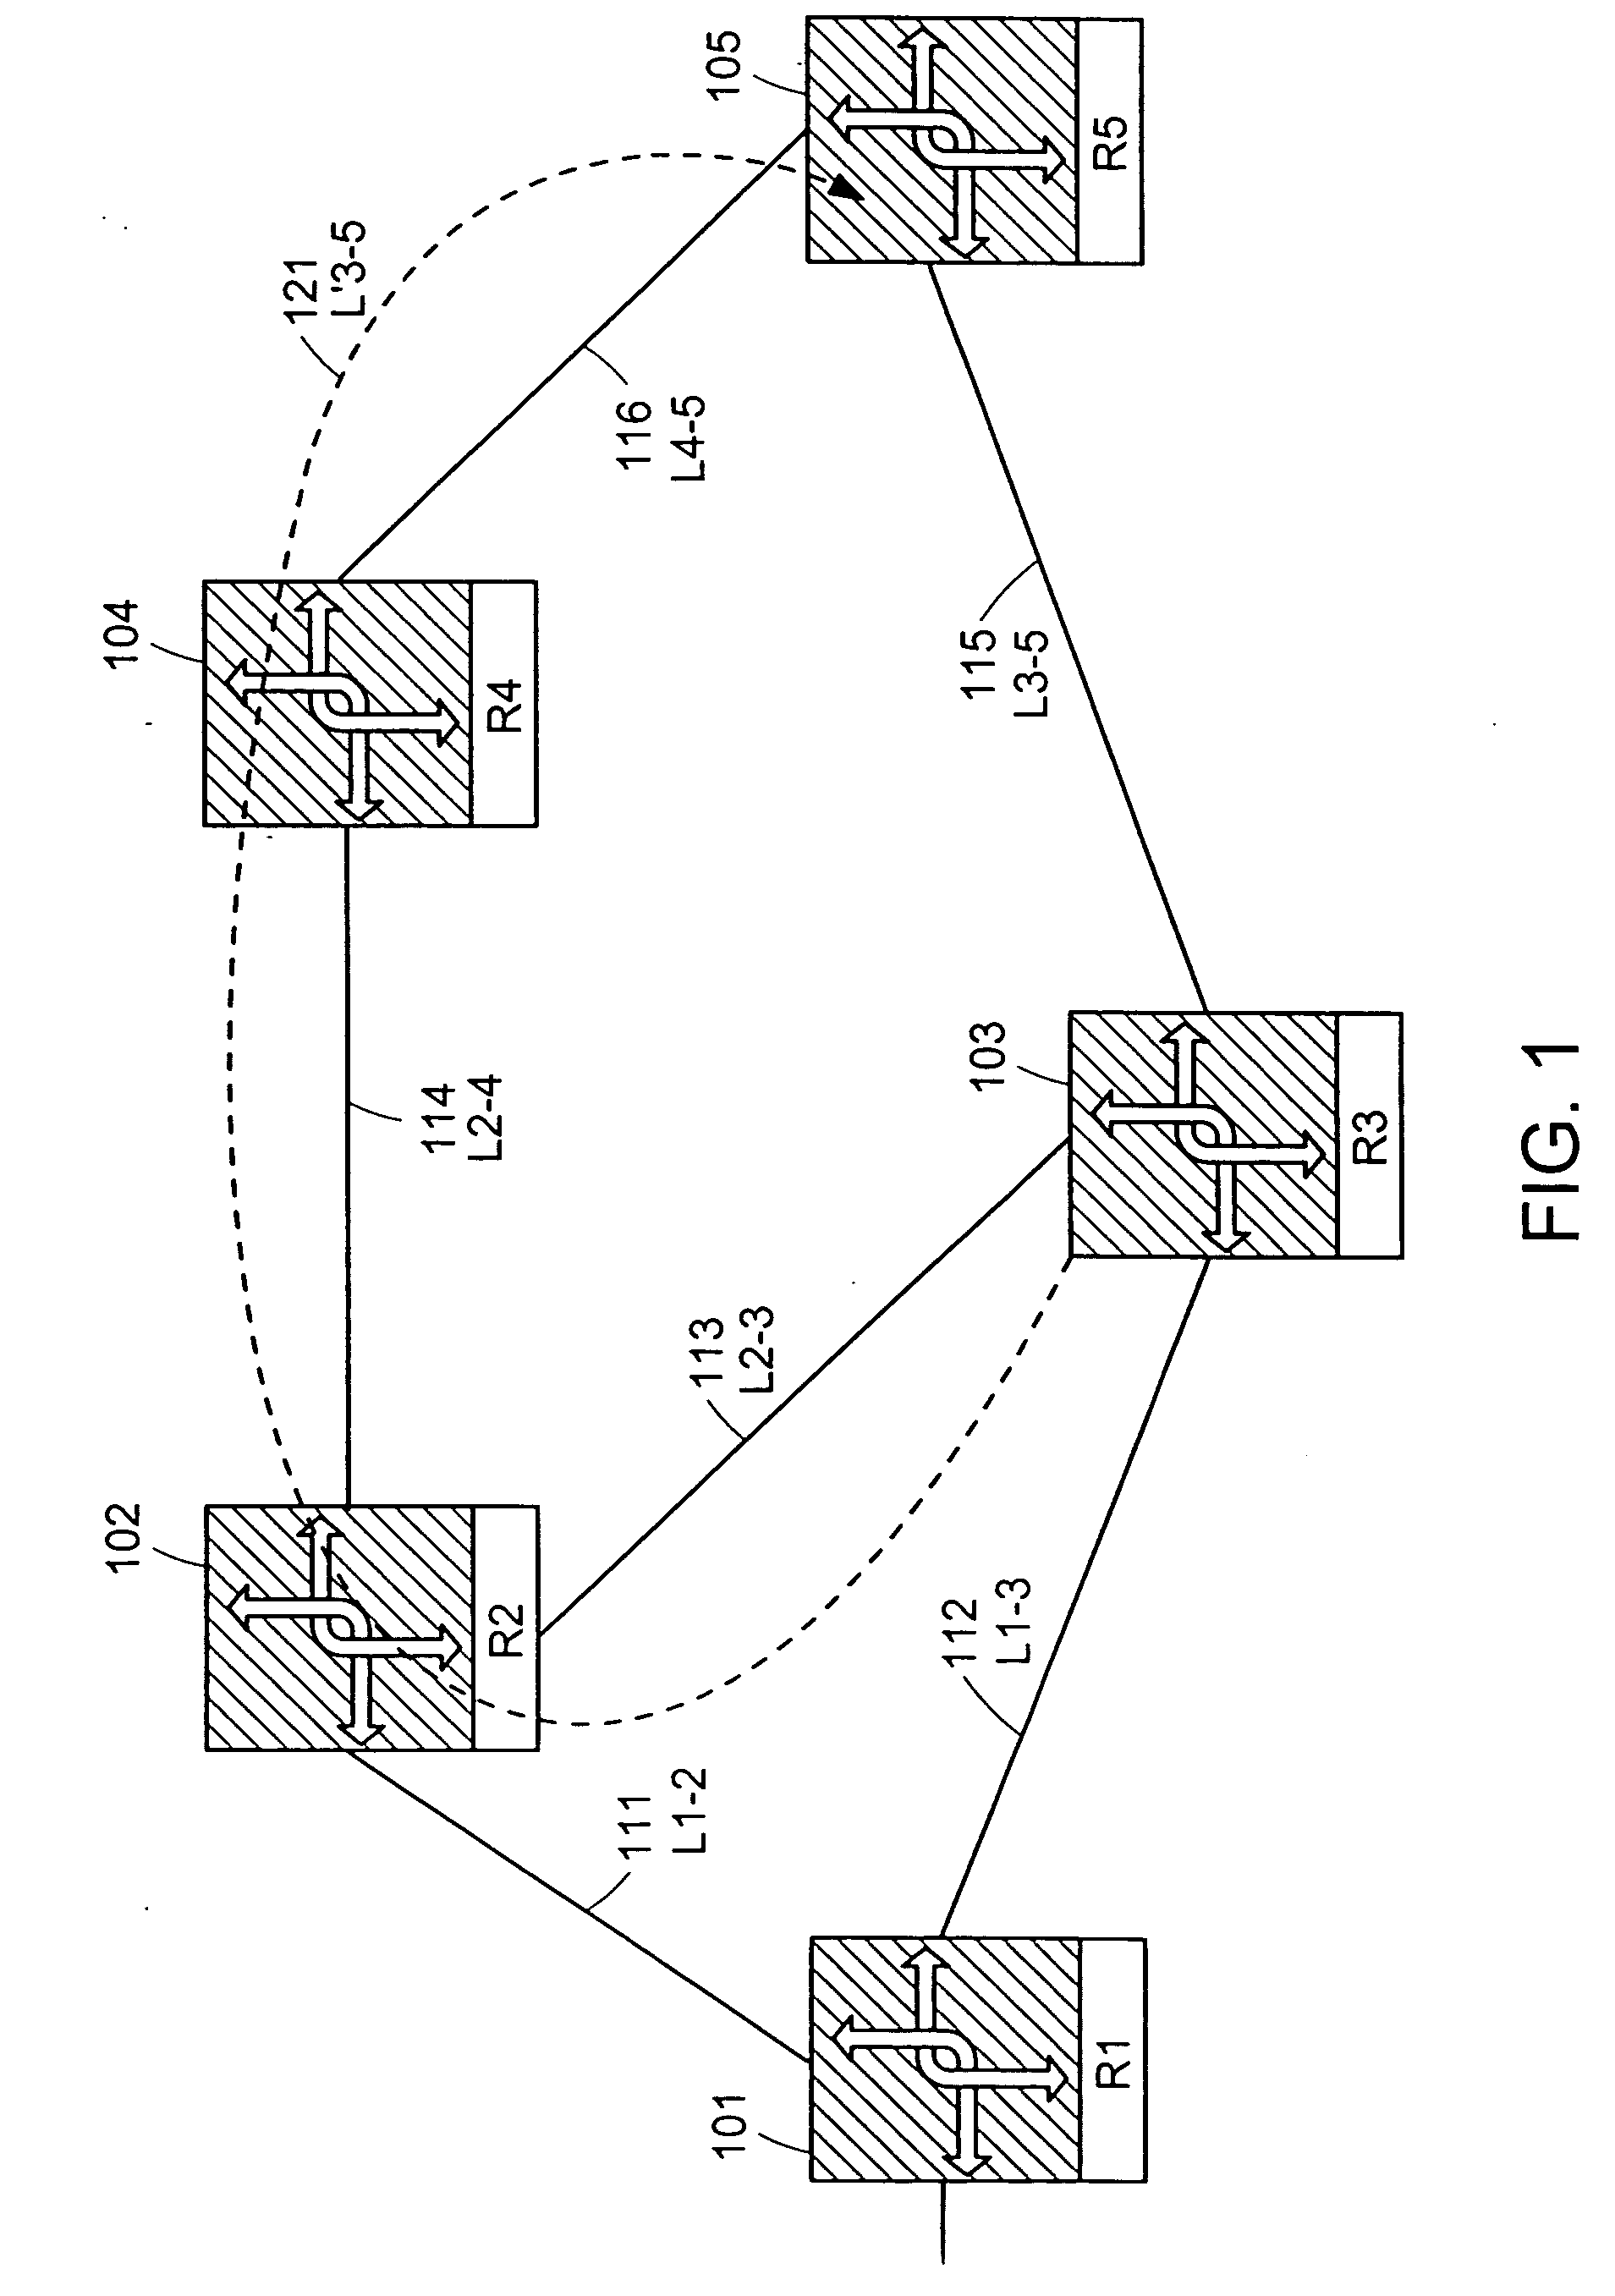 Automatic protection switching using link-level redundancy supporting multi-protocol label switching